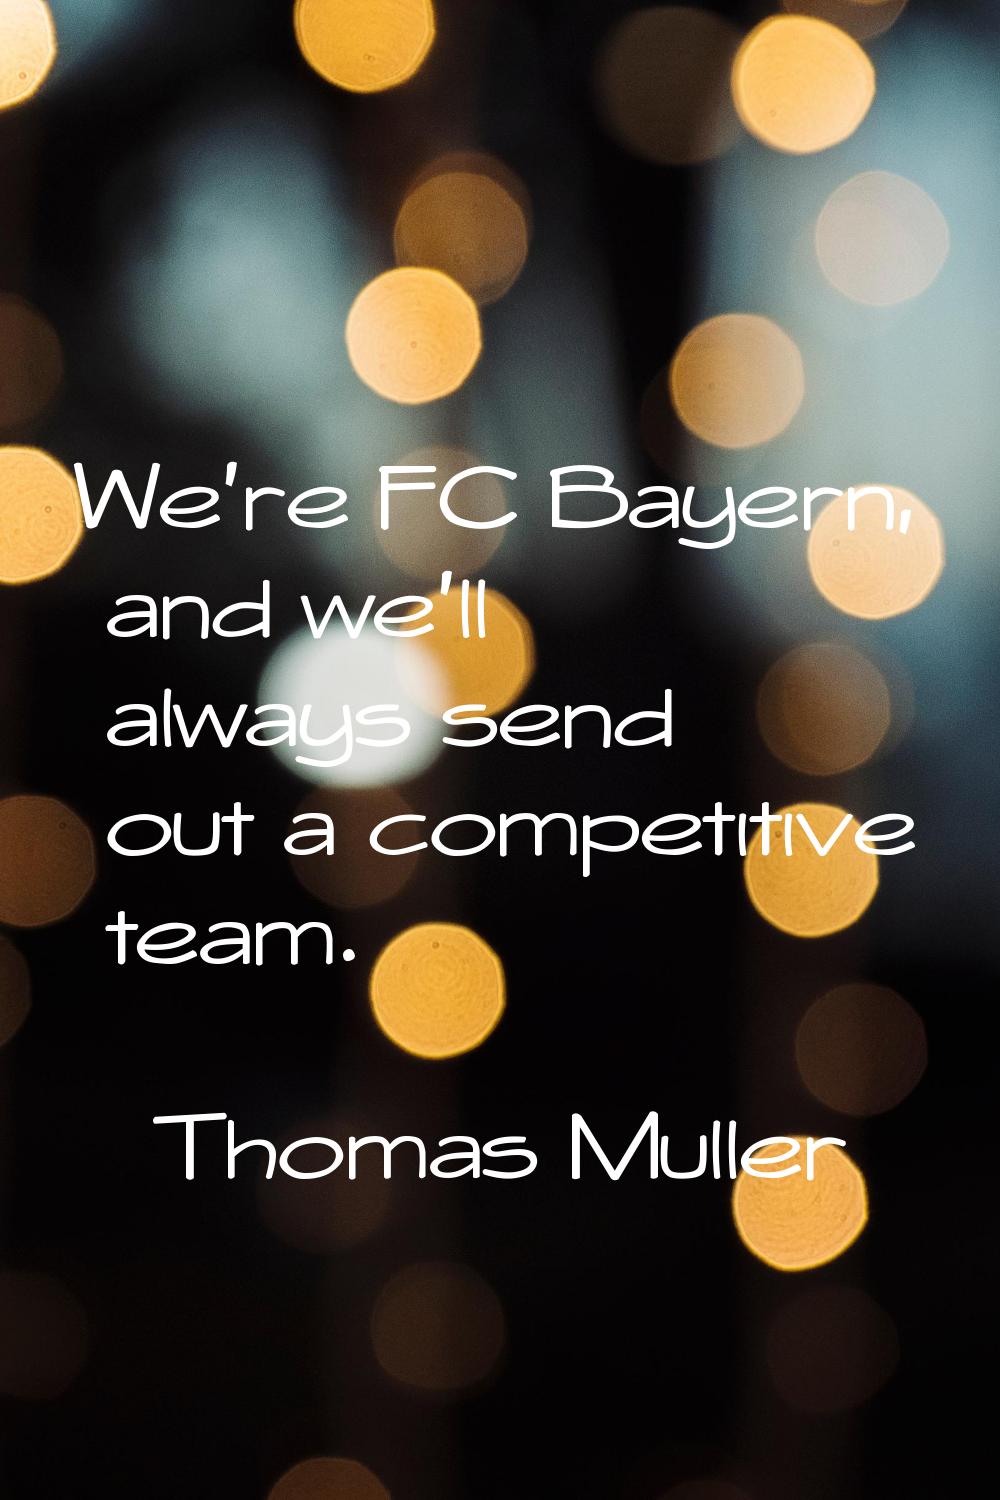 We're FC Bayern, and we'll always send out a competitive team.